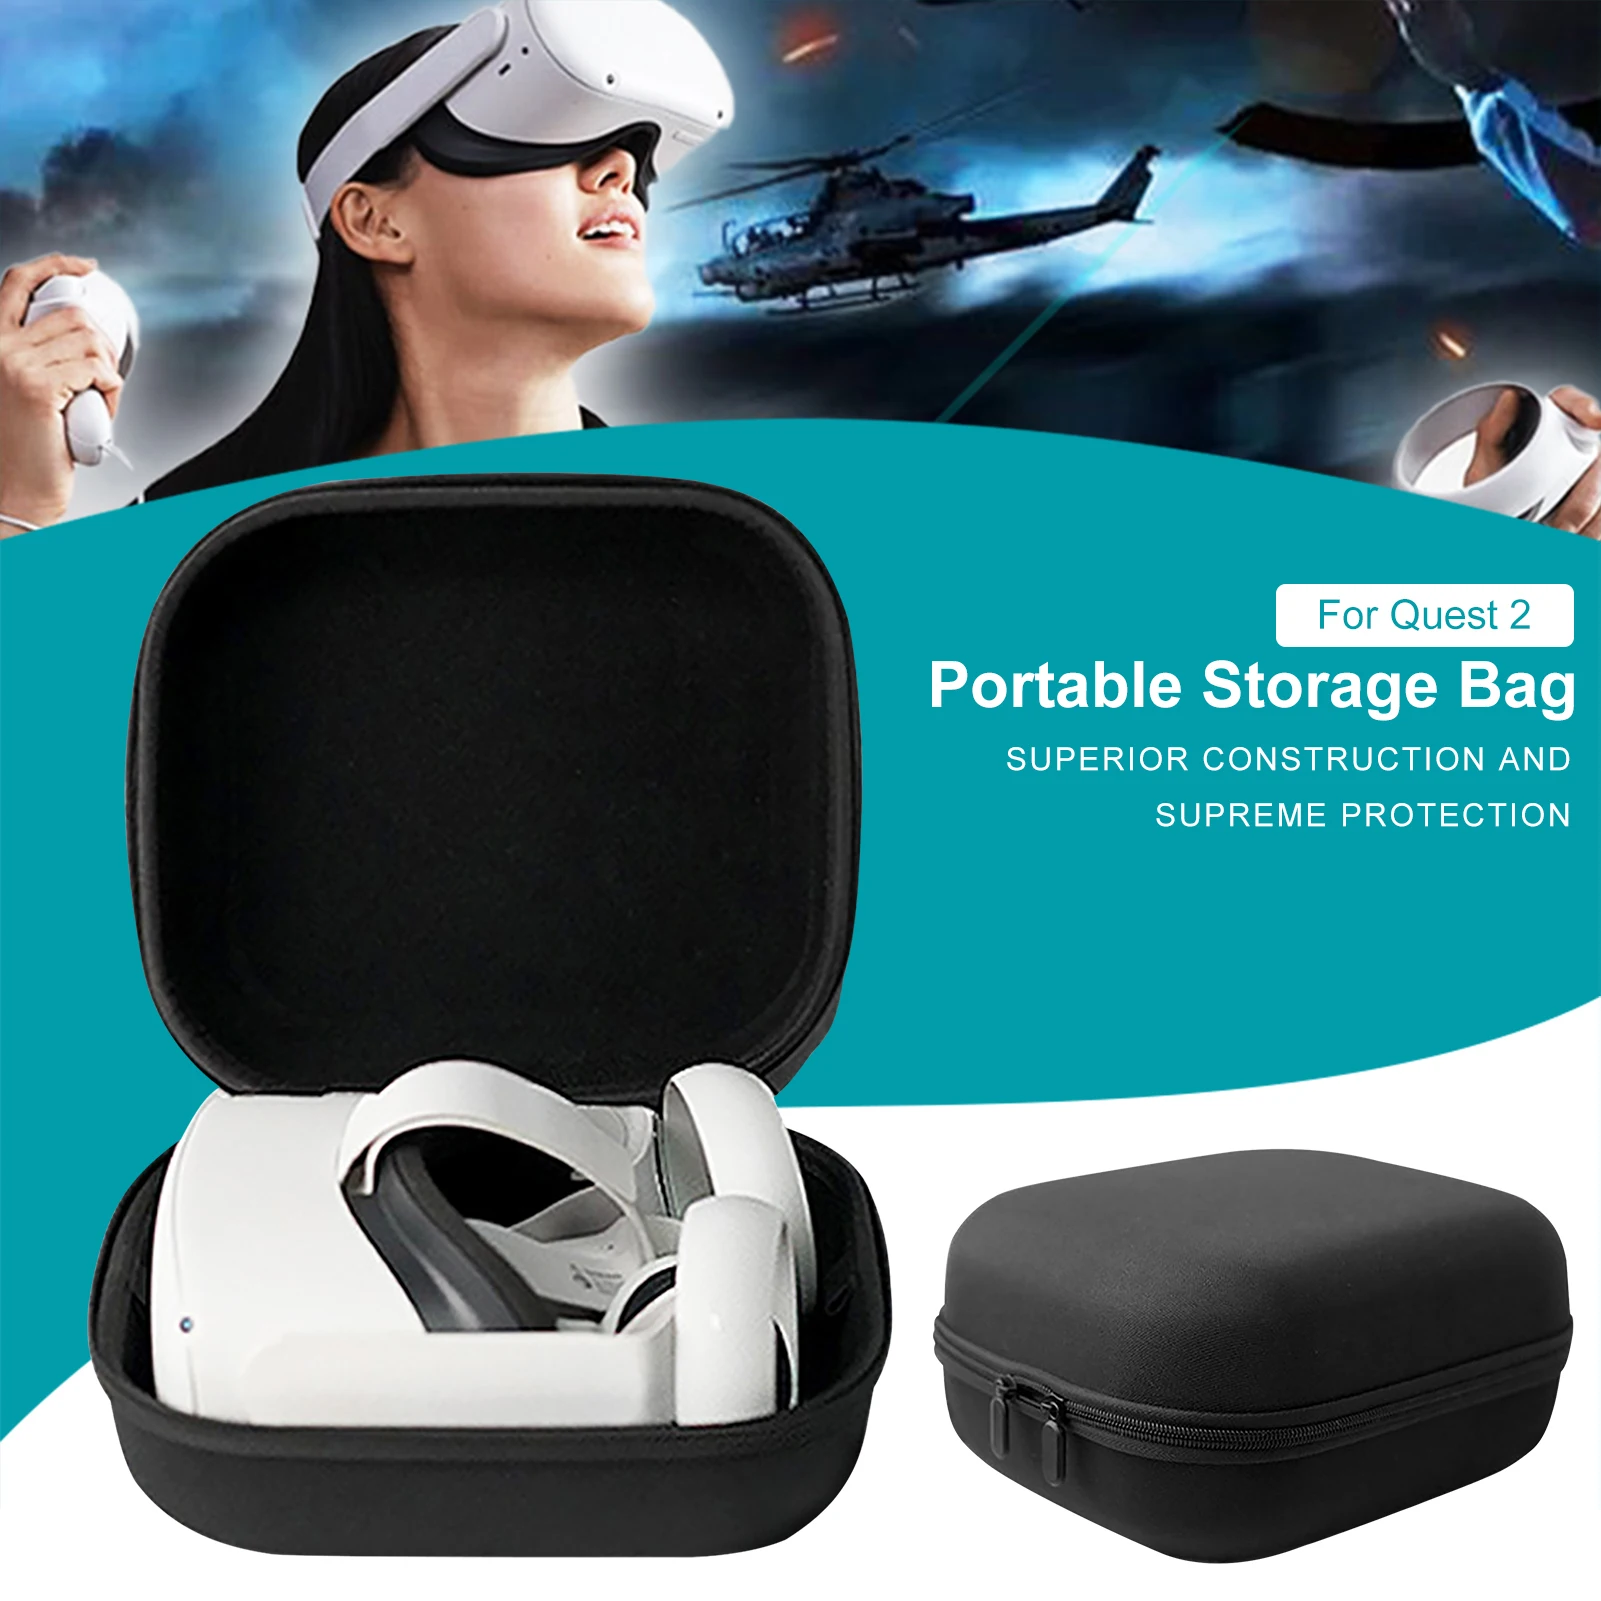 New Protable VR Accessories For Oculus Quest 2 VR Headset Travel Carrying Case EVA Storage Box For Oculus Quest 2